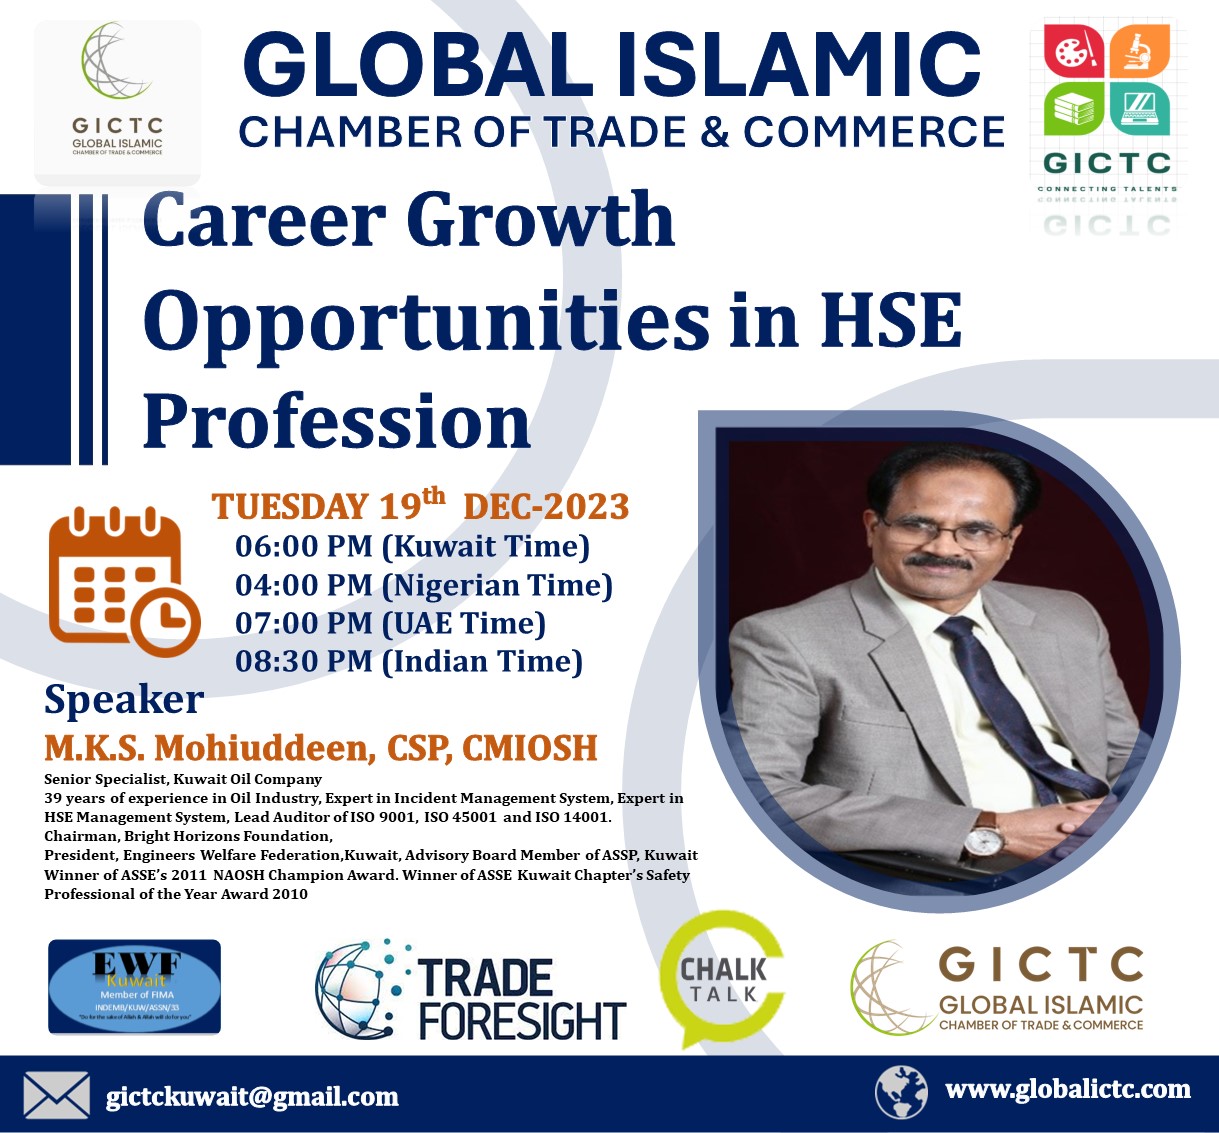 Global Islamic Chamber of Trade & Commerce-Kuwait Chapter (GICTC-KC) in association with GICTC Nigeria Chapter presents an exclusive program on “How to Prepare a Professional and Smart Resume”. We request all of you to register this online program in advance and make use of this opportunity.